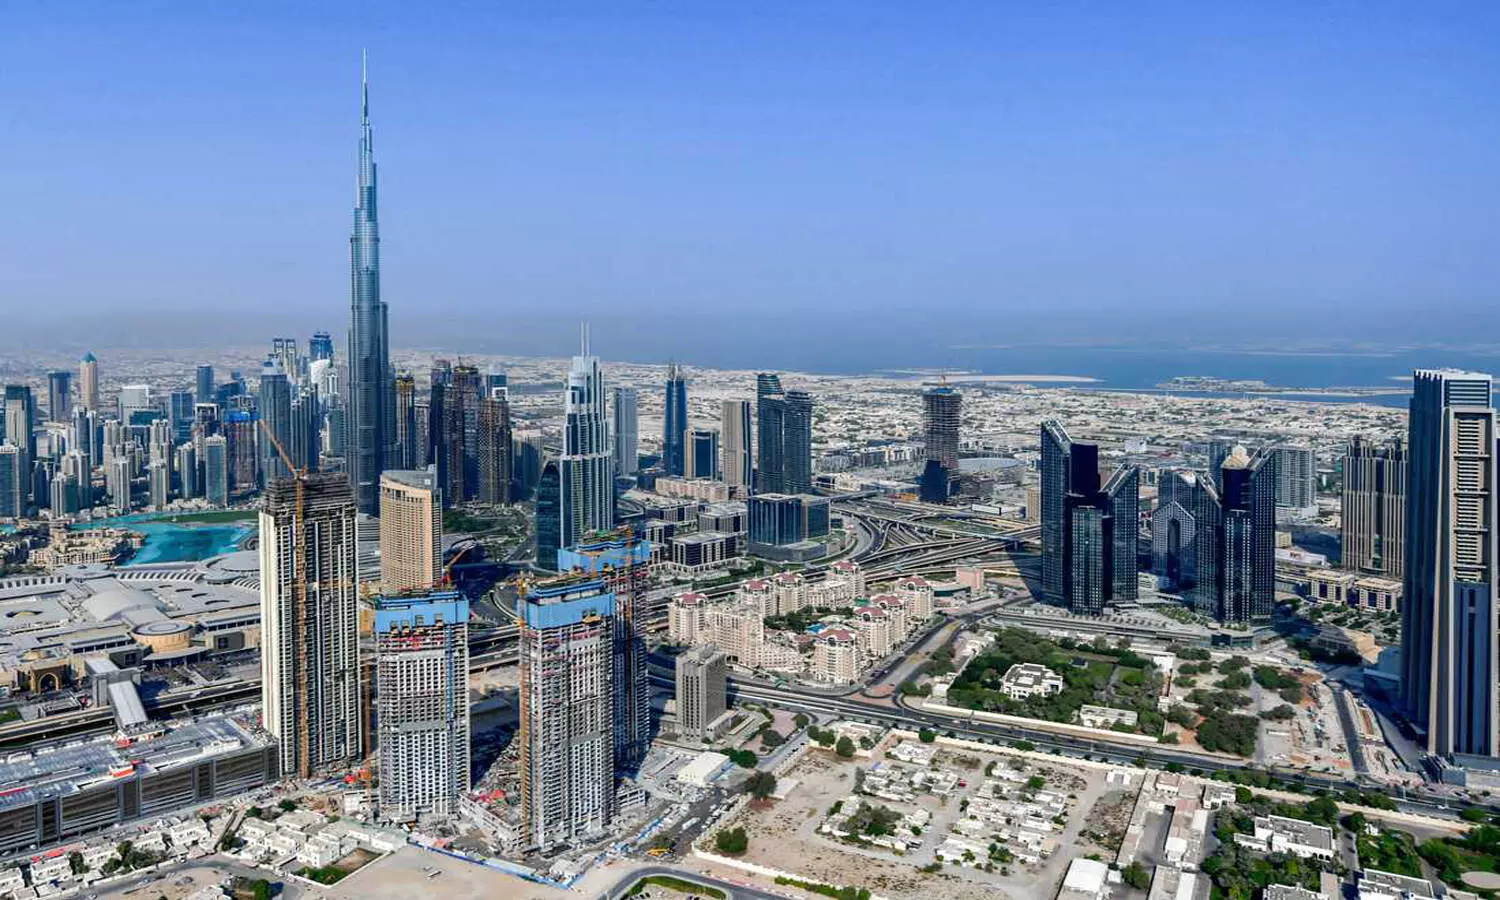 UAE announces 4.5 days work week to boost productivity; First nation to take this decision